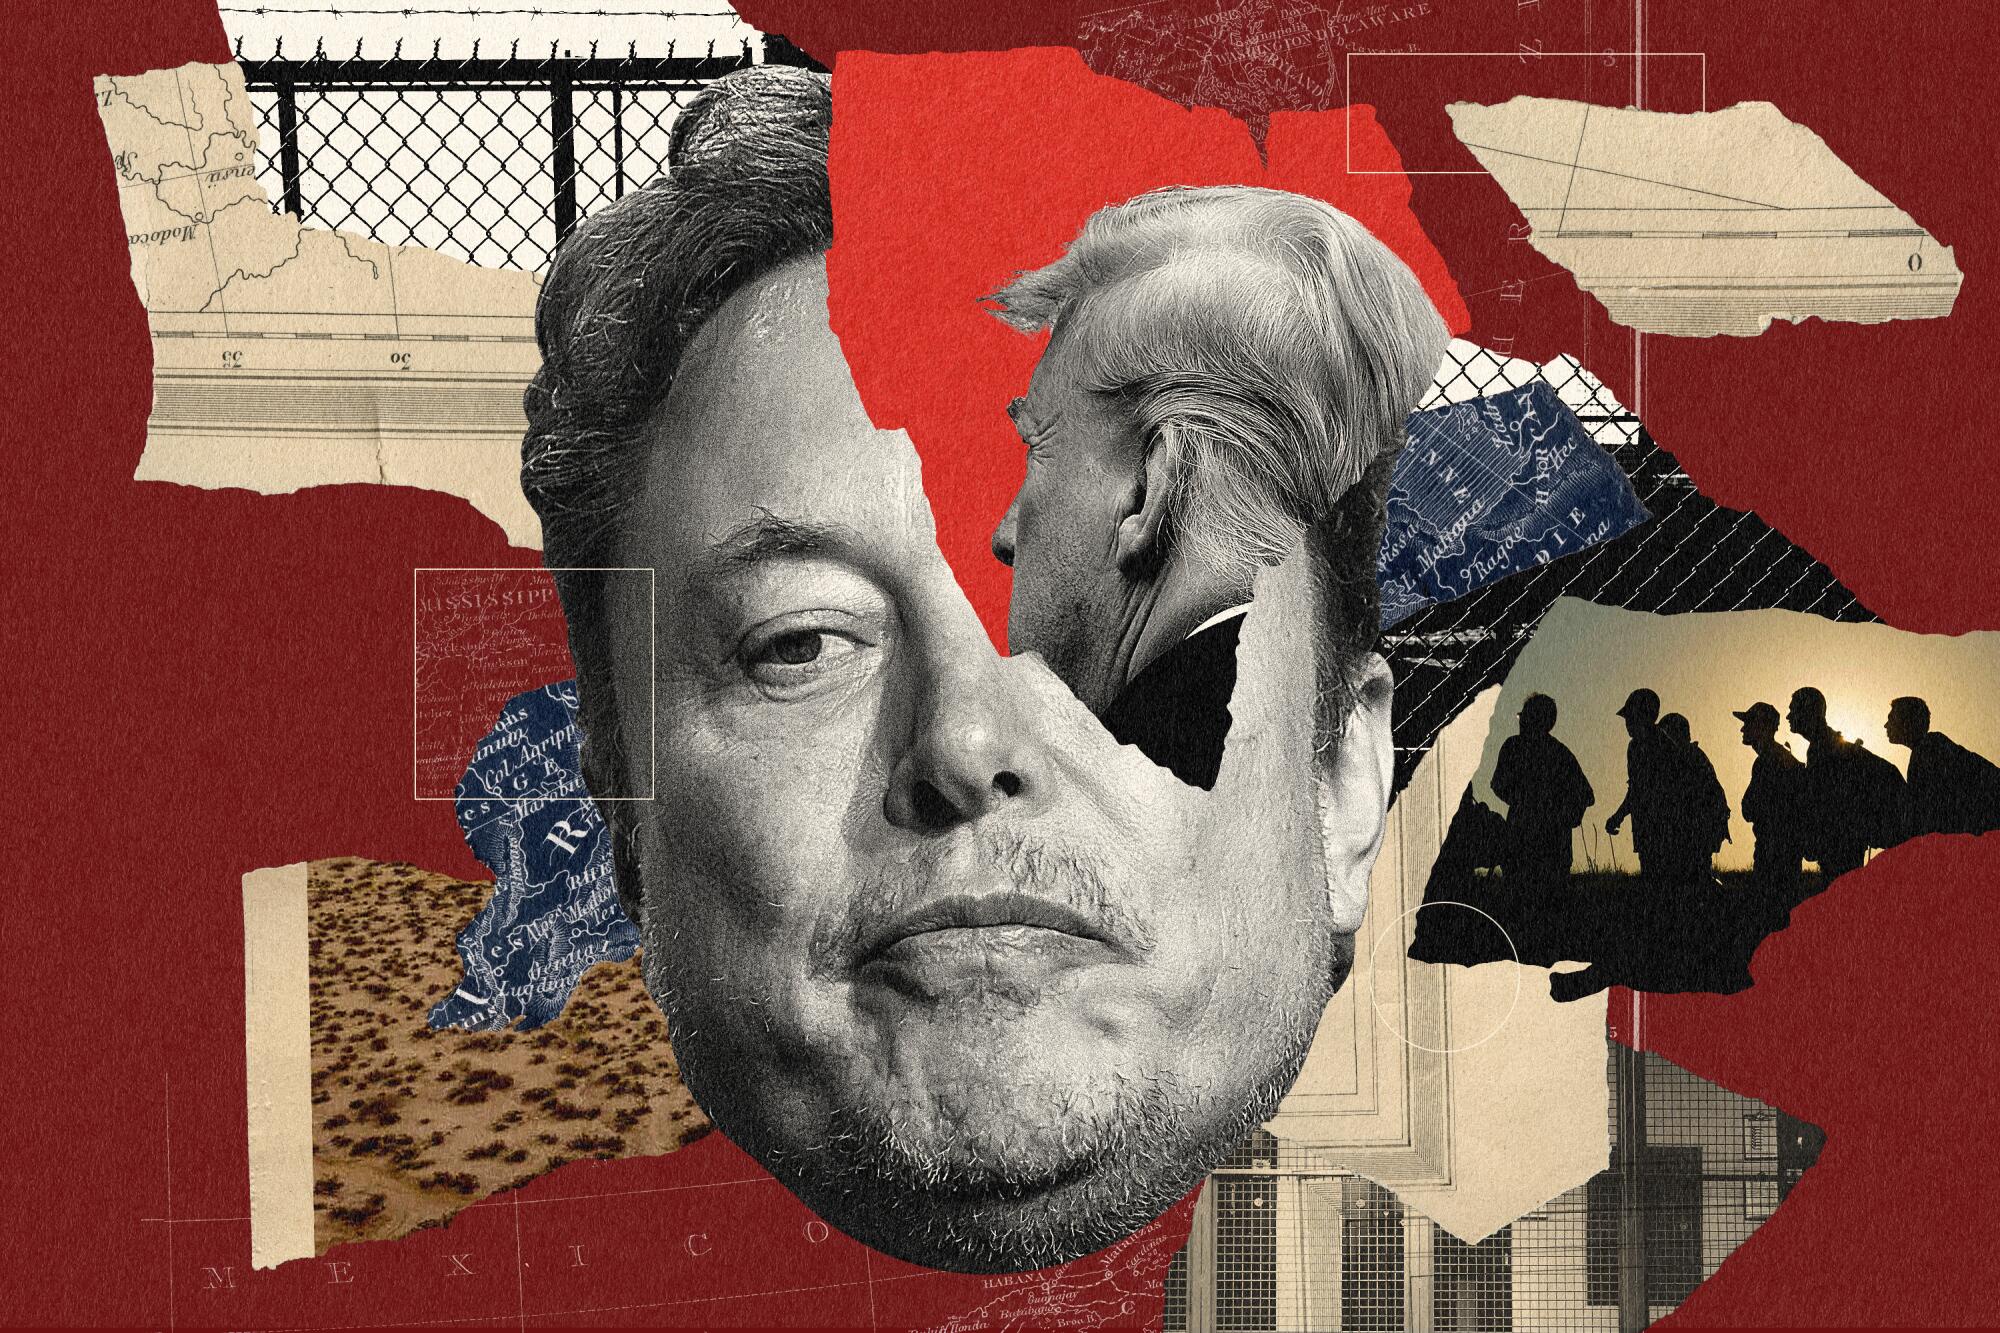 Photo illustration of Elon Musk, Donald Trump, photos of immigrants and maps